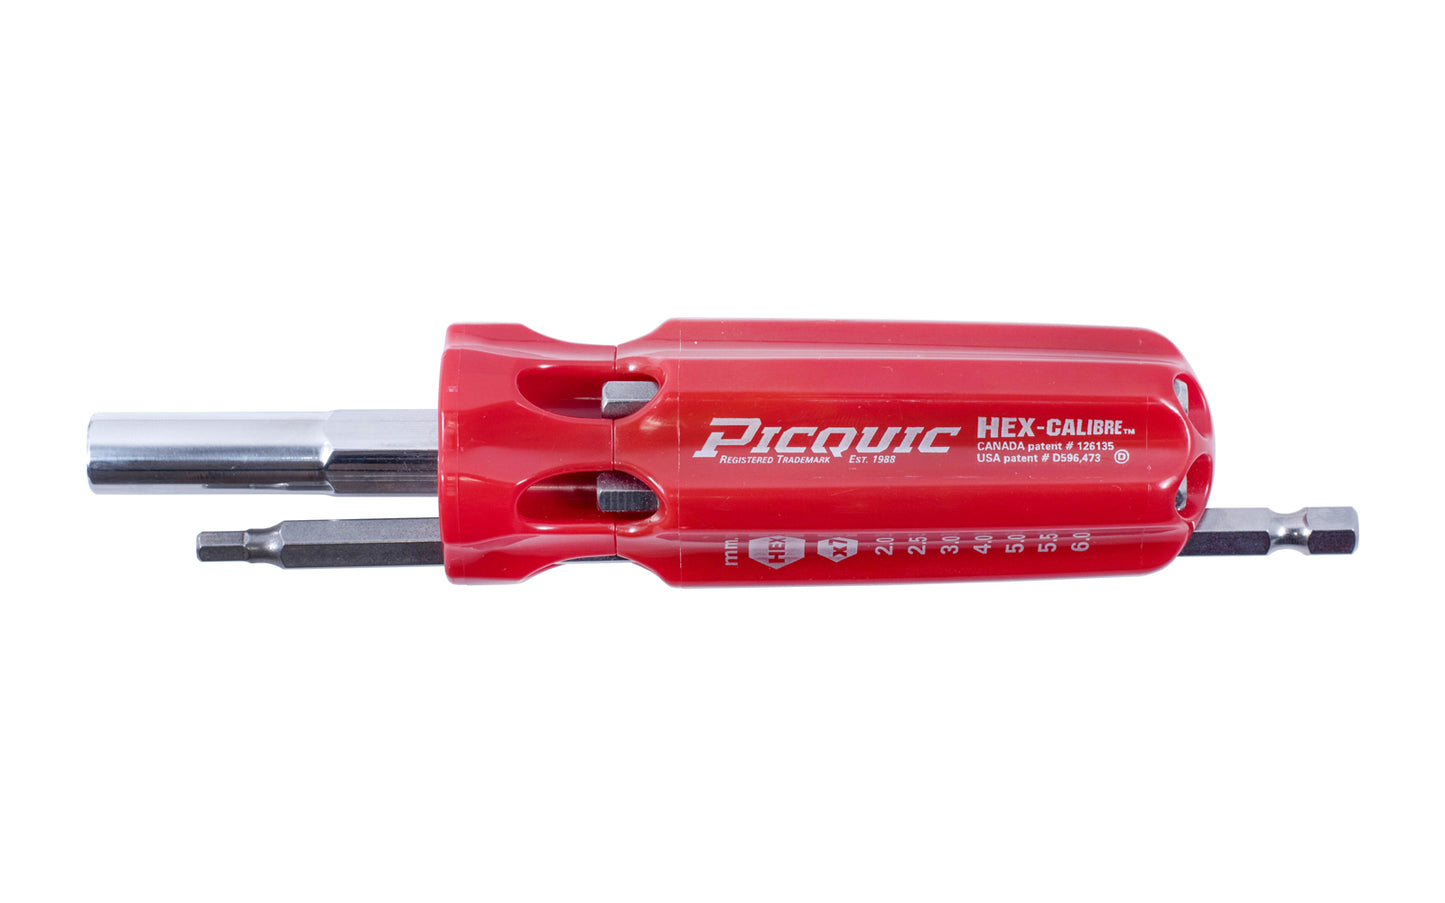 Picquic Model 88153 - Metric "Hex Calibre" with a solid handle for comfort & torque, & has no moving parts. Bits included: 2 mm, 2.5 mm, 3 mm, 4 mm, 5 mm, 5.5 mm, 6 mm size hex bits. Picquic TrueTorx Multi-Bit screwdriver with bit storage in handle. 57369881009. magnetic rare earth magnet holds the working bit in shank